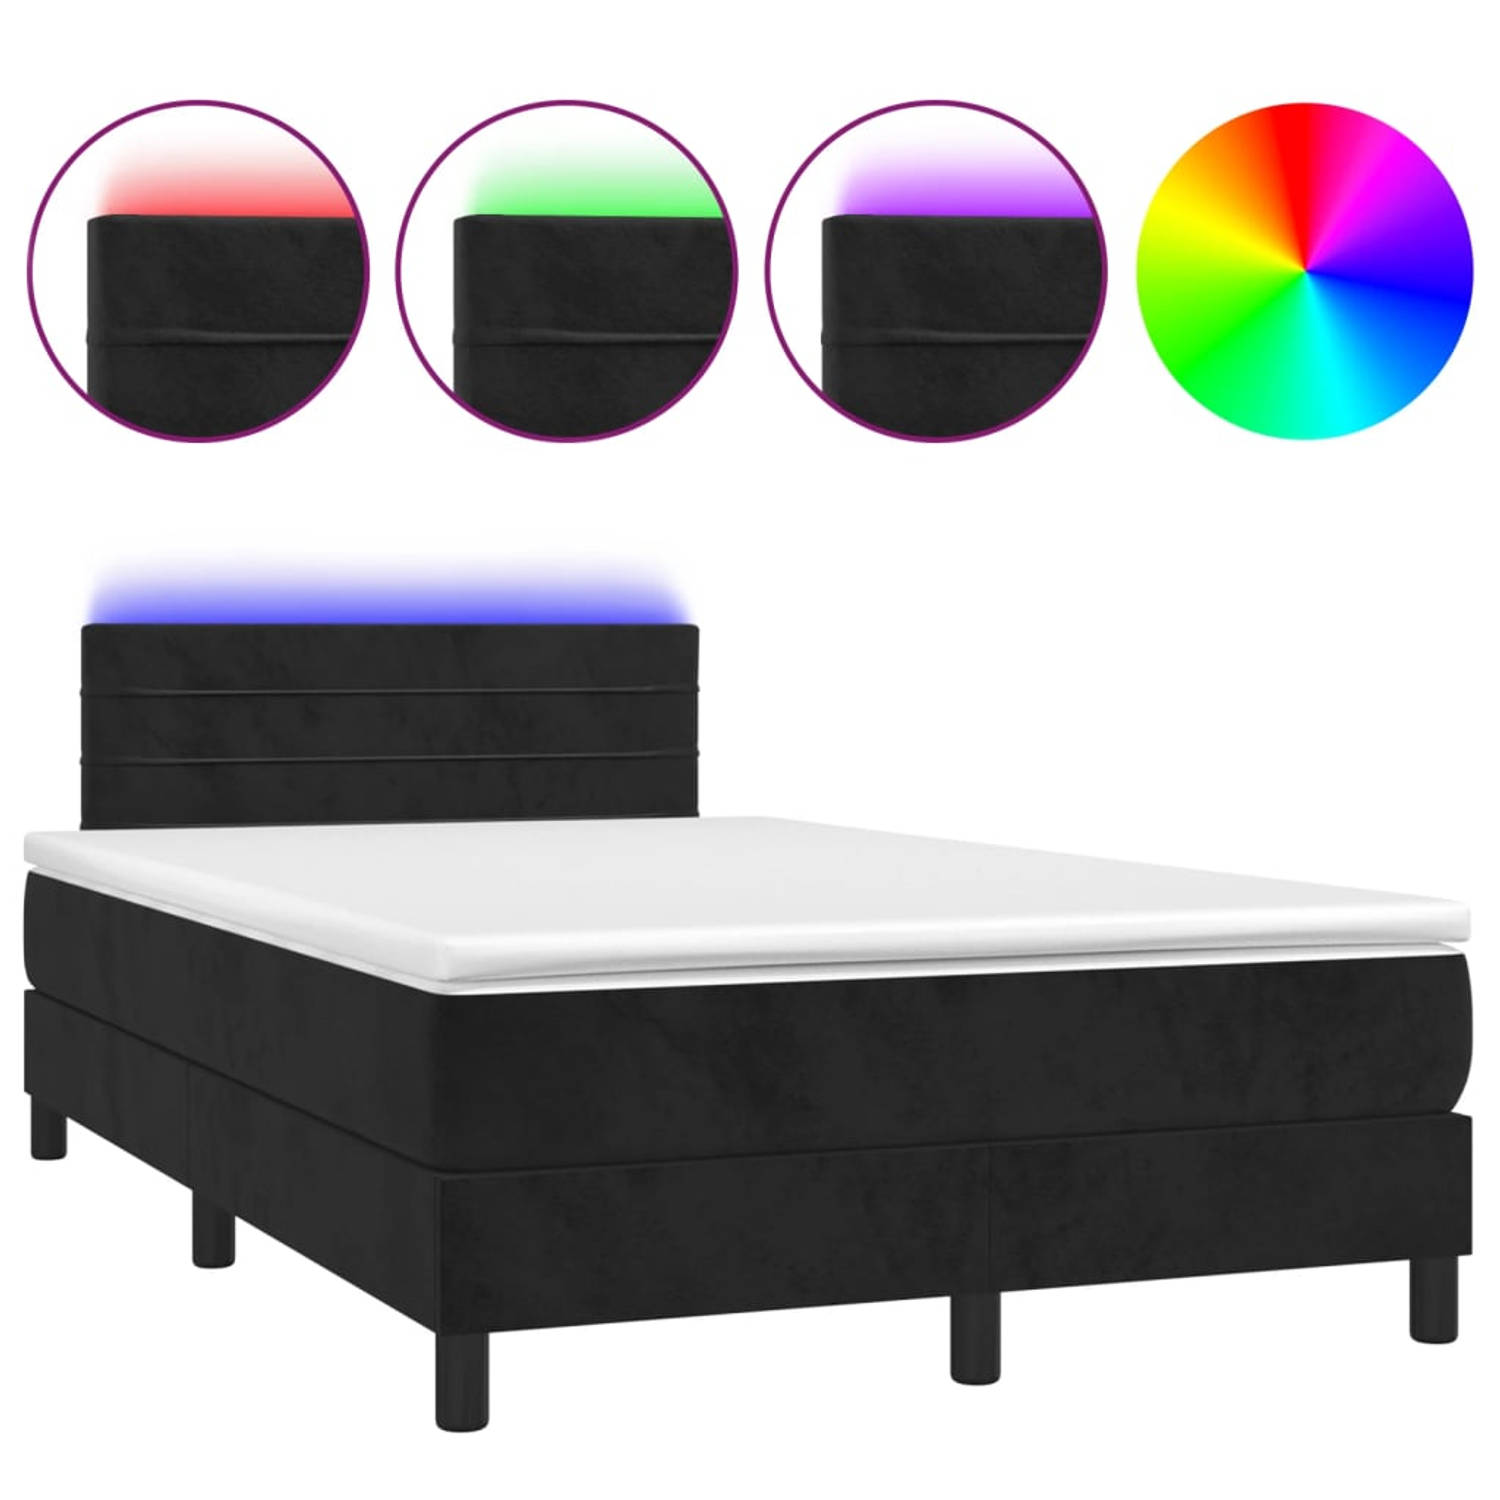 The Living Store Boxspring  Zacht fluwelen bed met LED-verlichting  Verstelbaar hoofdbord  Pocketvering matras  Huidvriendelijk topmatras